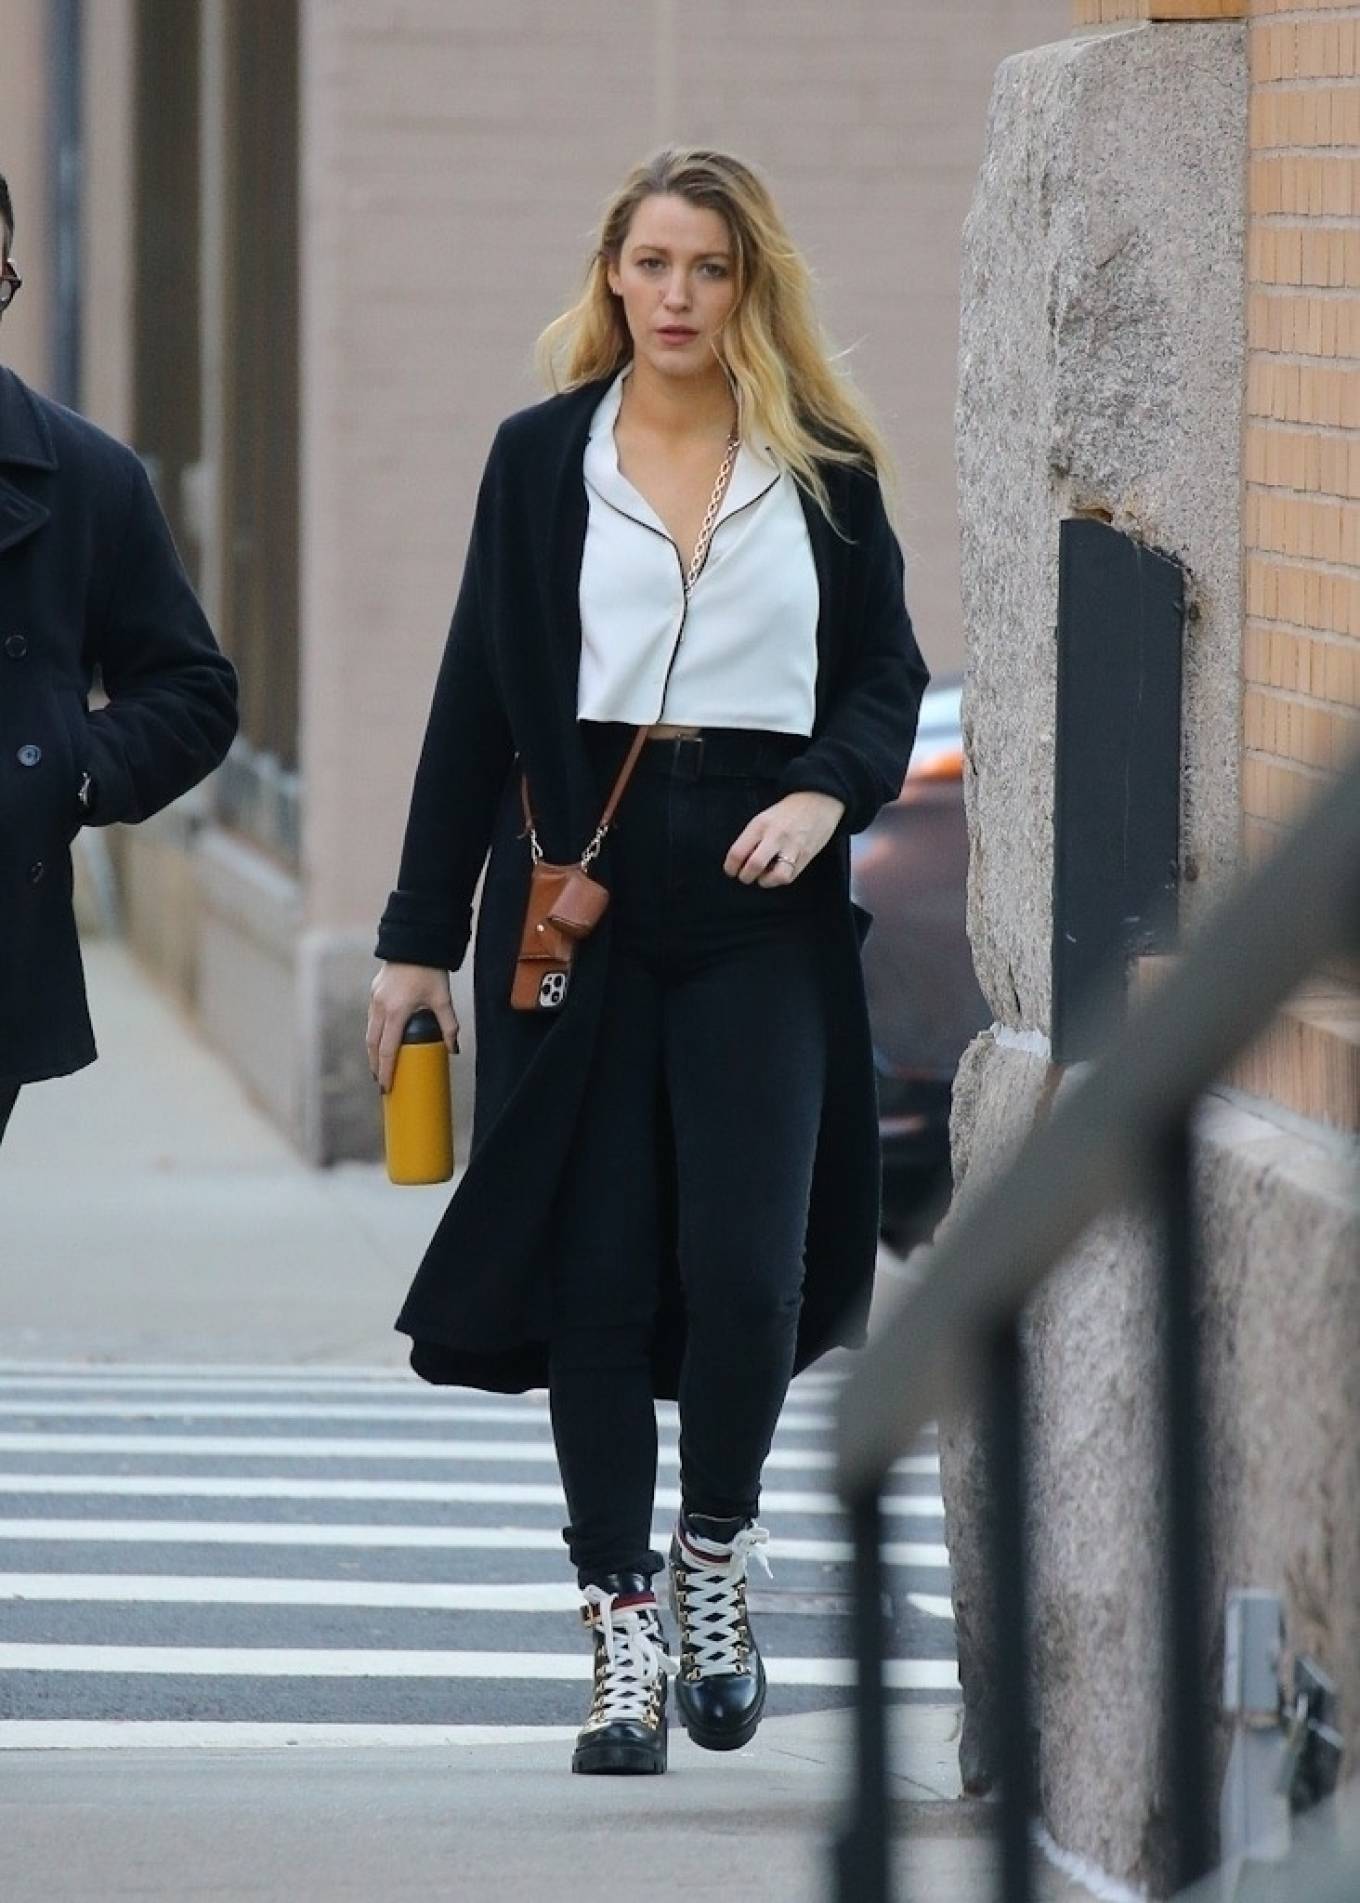 Blake Lively 2021 : Blake Lively – Out for a stroll in NYC-16